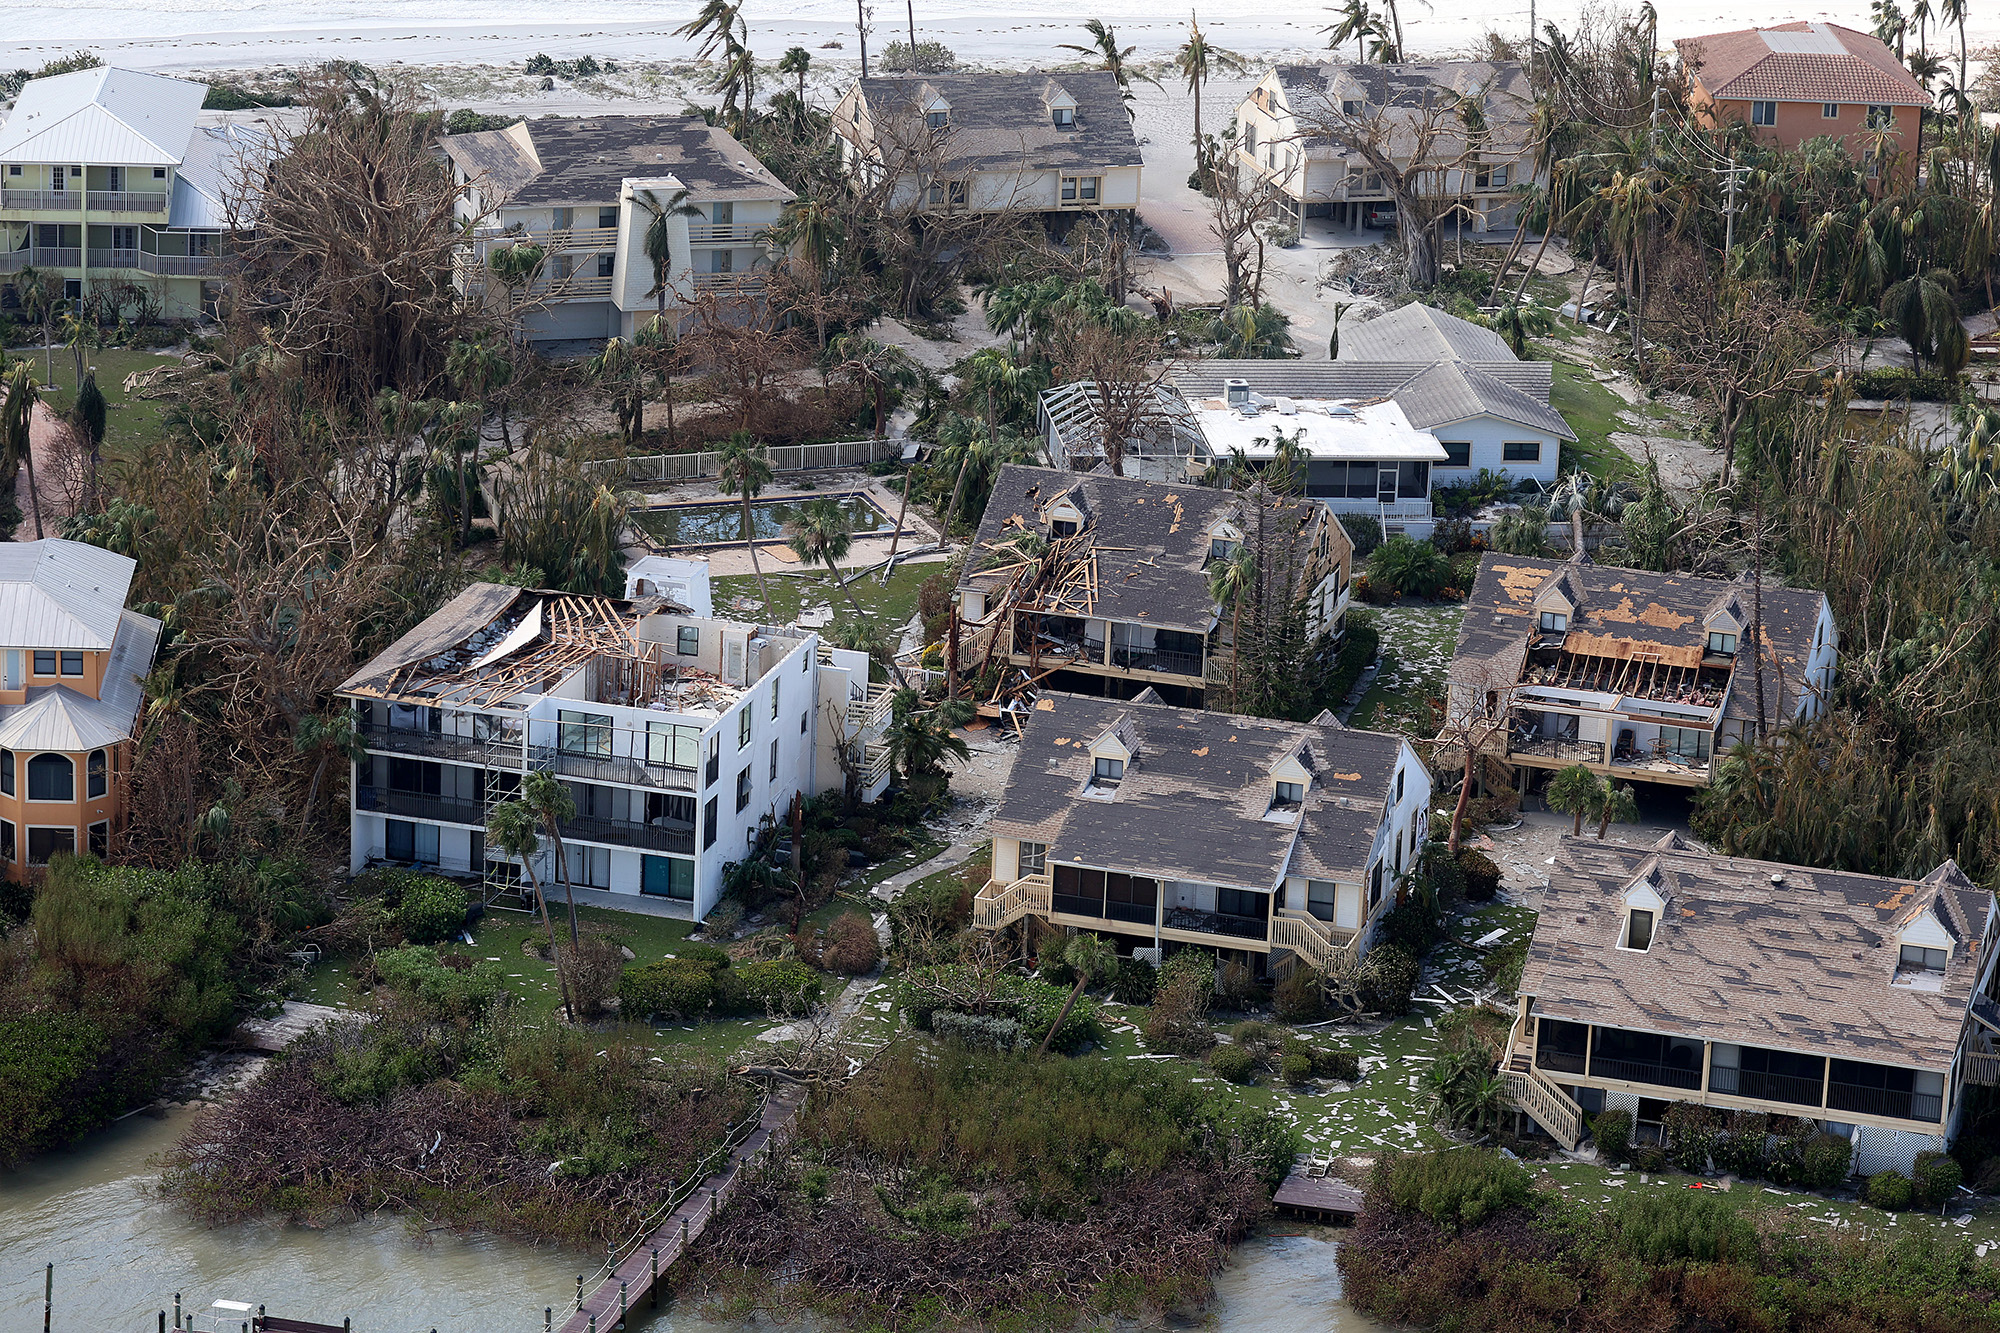 An aerial view of homes show damage after Hurricane Ian passed through Sanibel, Florida on September 29.